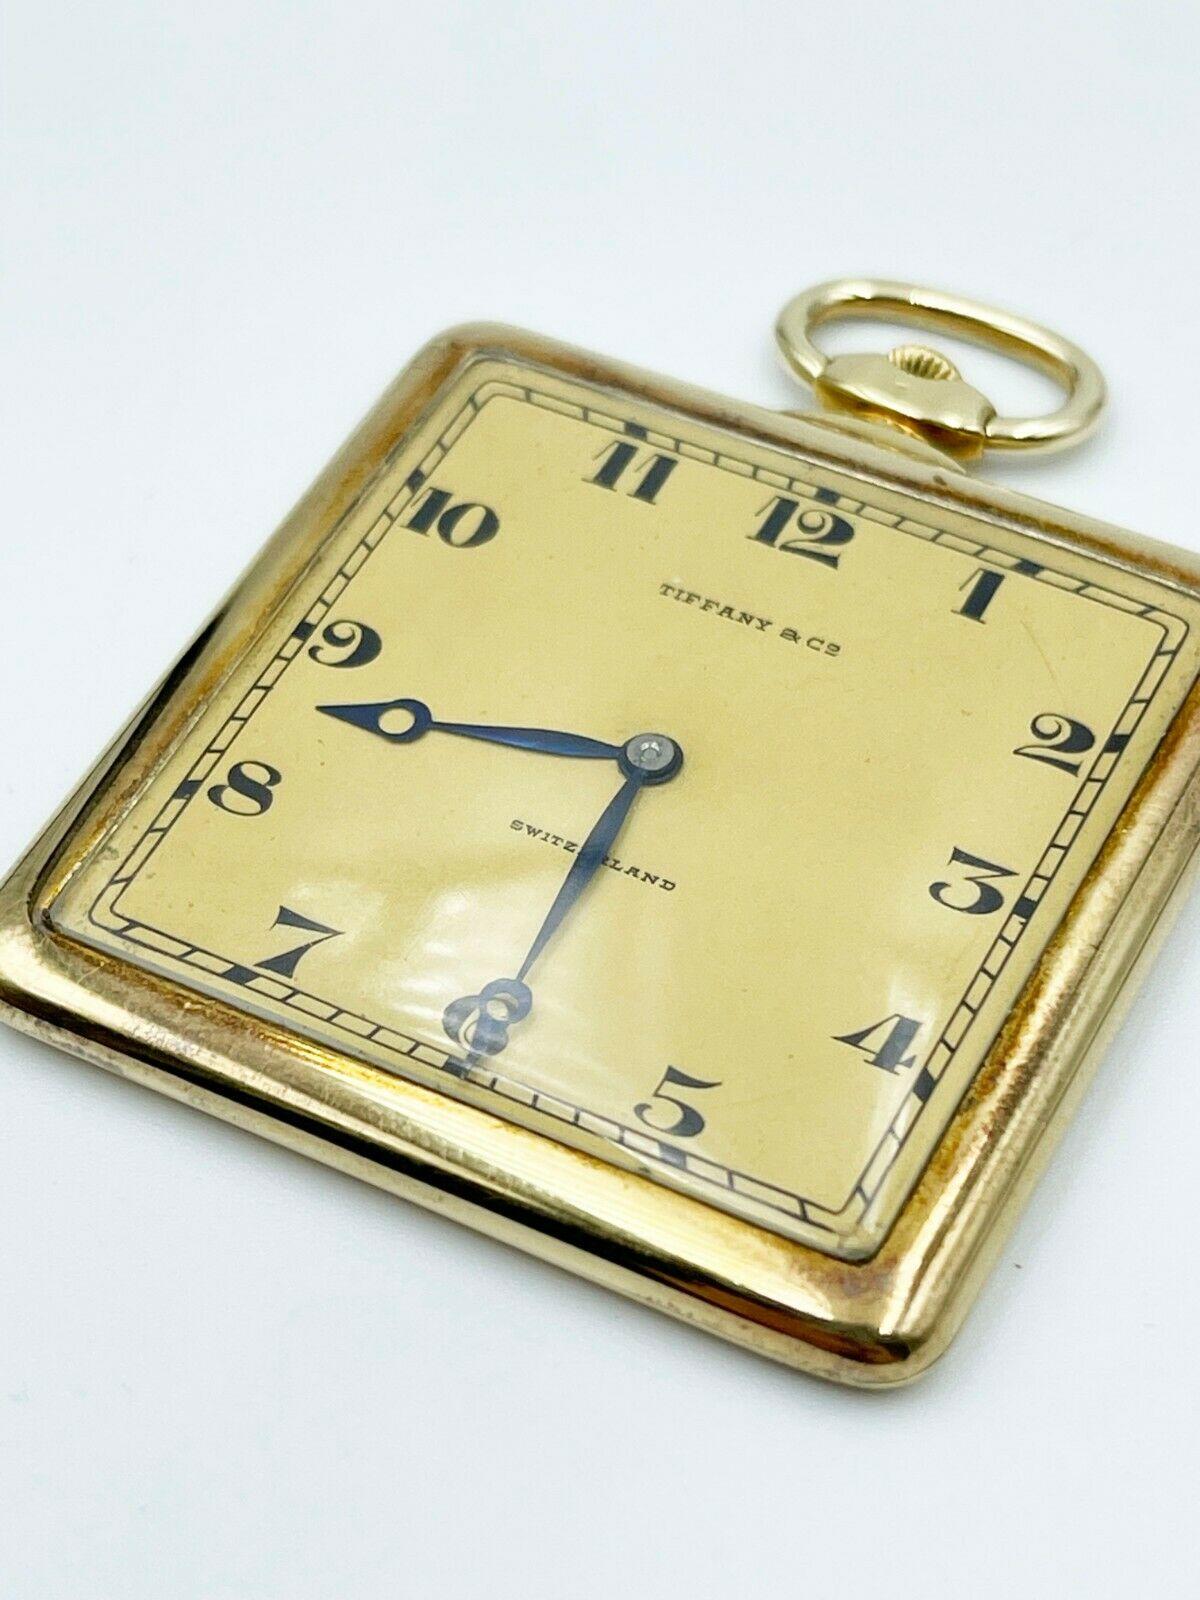 Tiffany & Co. Pocket Watch



Year:1920's

 

Case Material: 18K Yellow Gold

 

Dial: Champagne

 

Case Size: 40mm Square Case

 

Includes: 

-Elegant Presentation Box or Pouch 

-Certified Appraisal 

-1 Year Warranty